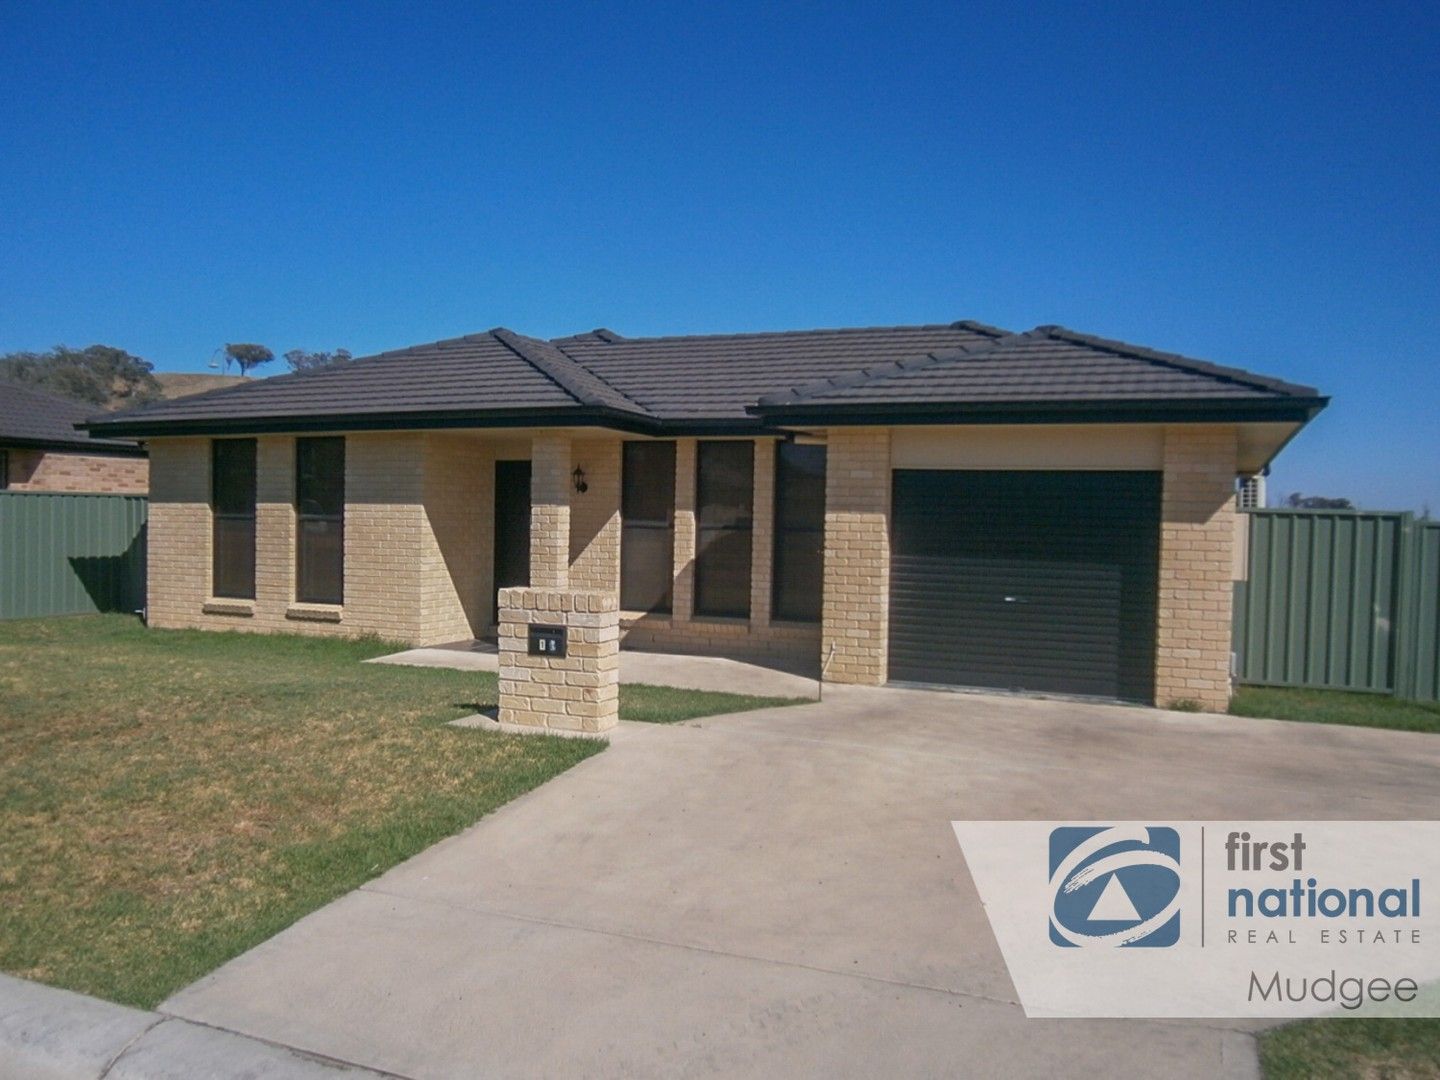 4 bedrooms House in 1 Tennant Close MUDGEE NSW, 2850